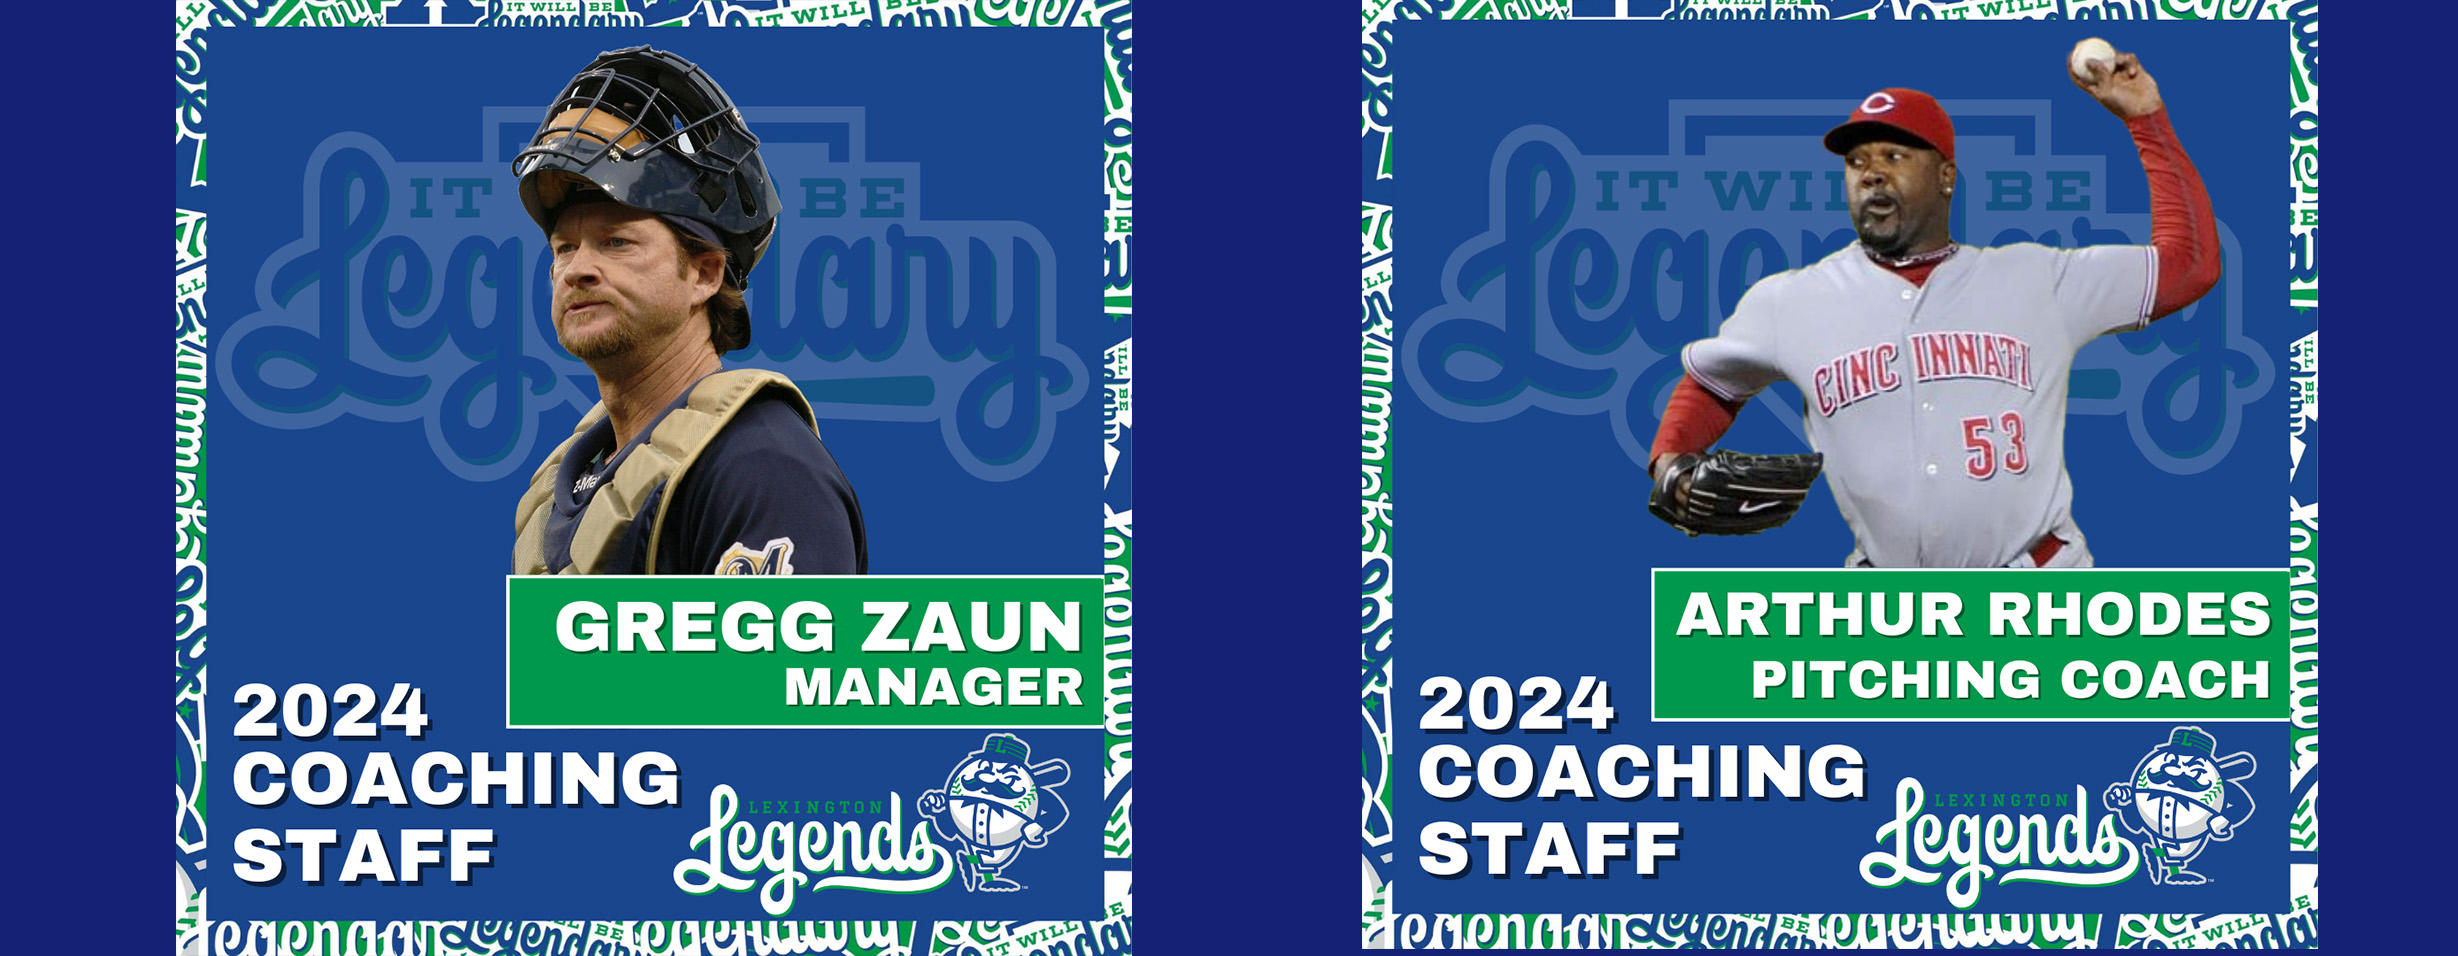 Legends name Zaun as manager; Rhodes as pitching coach